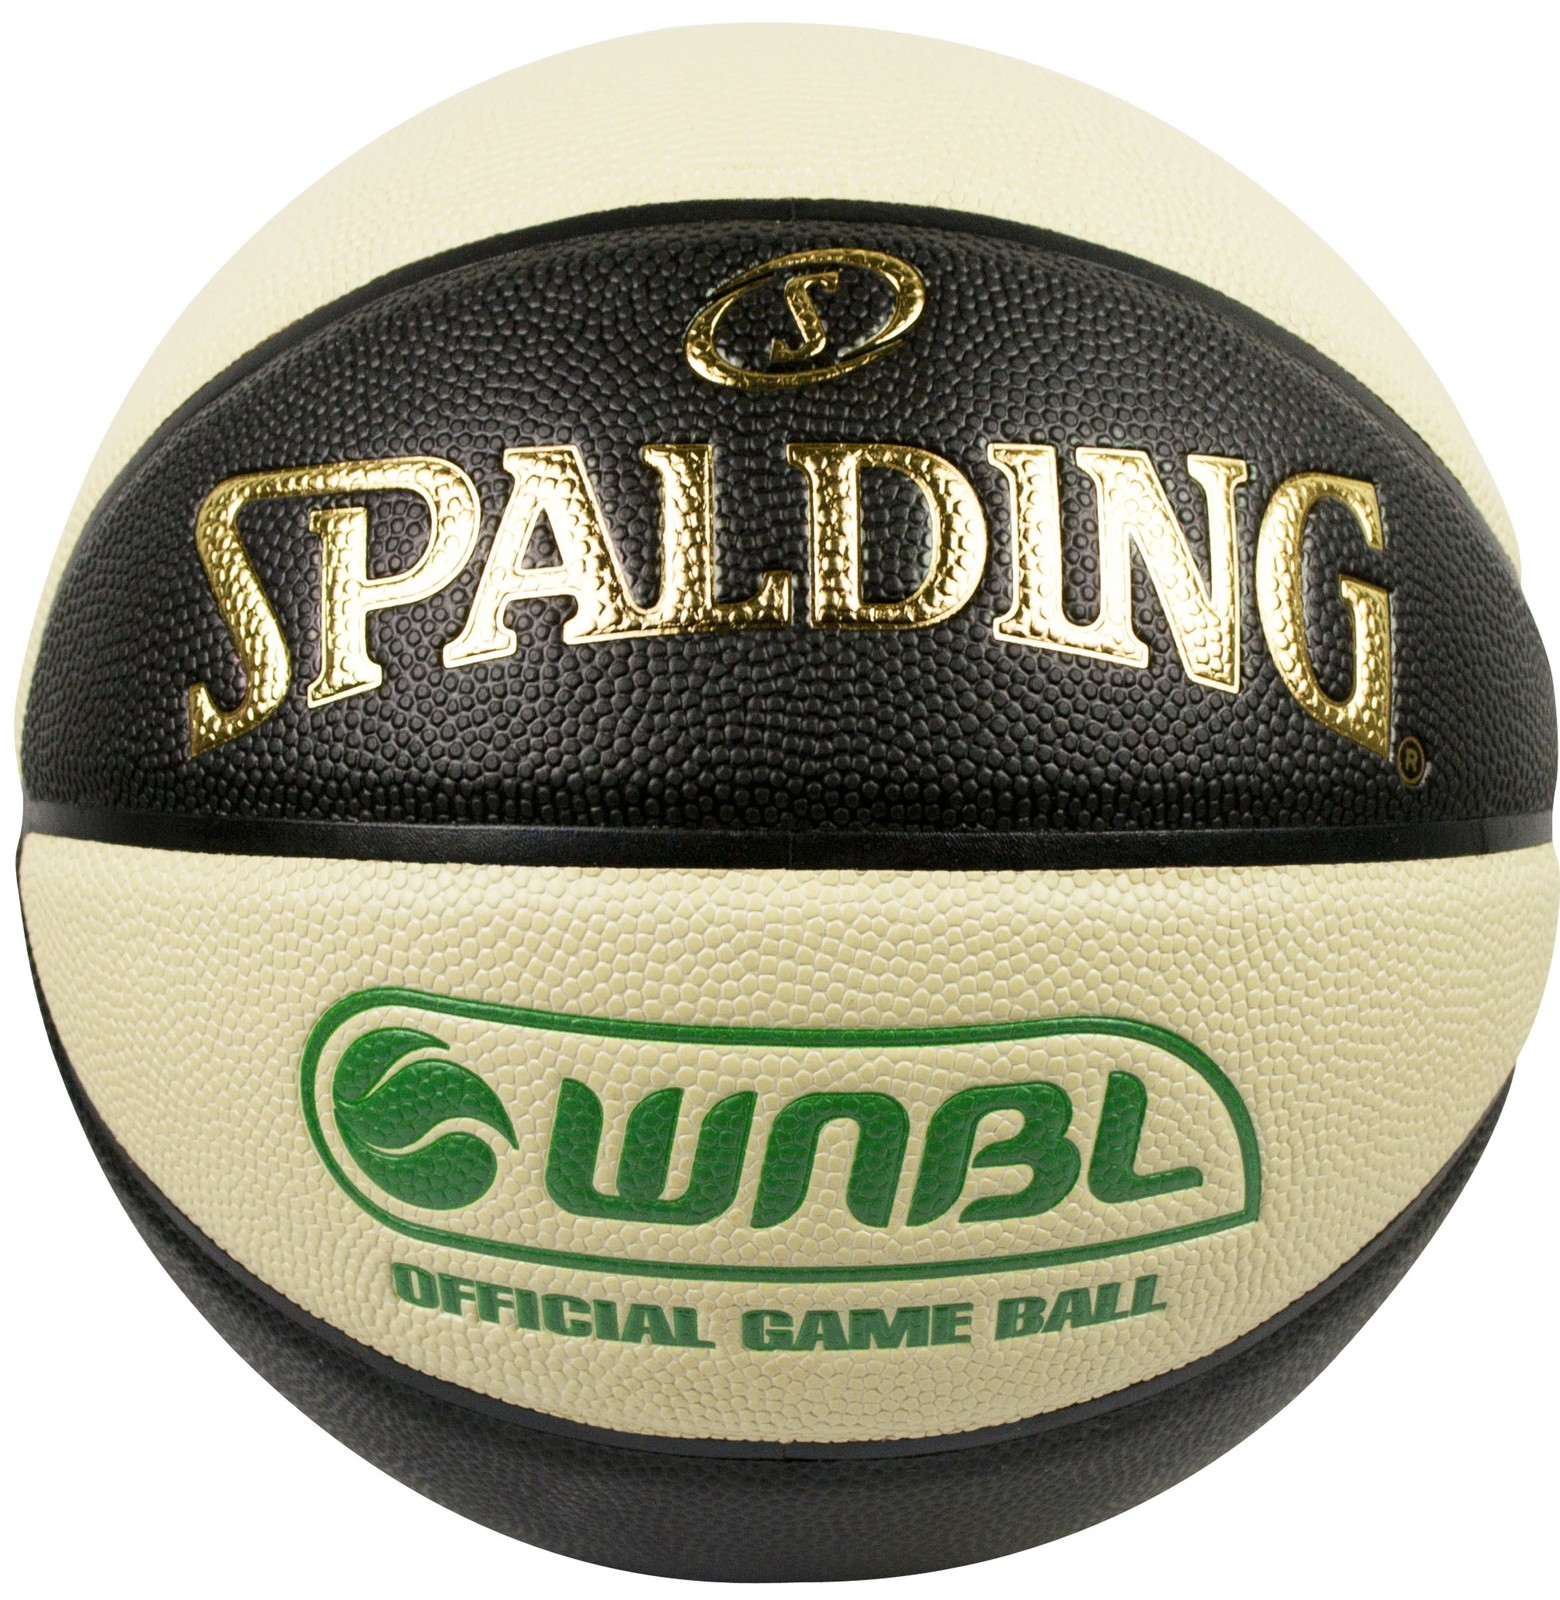 Spalding Official WNBL Game Basketball